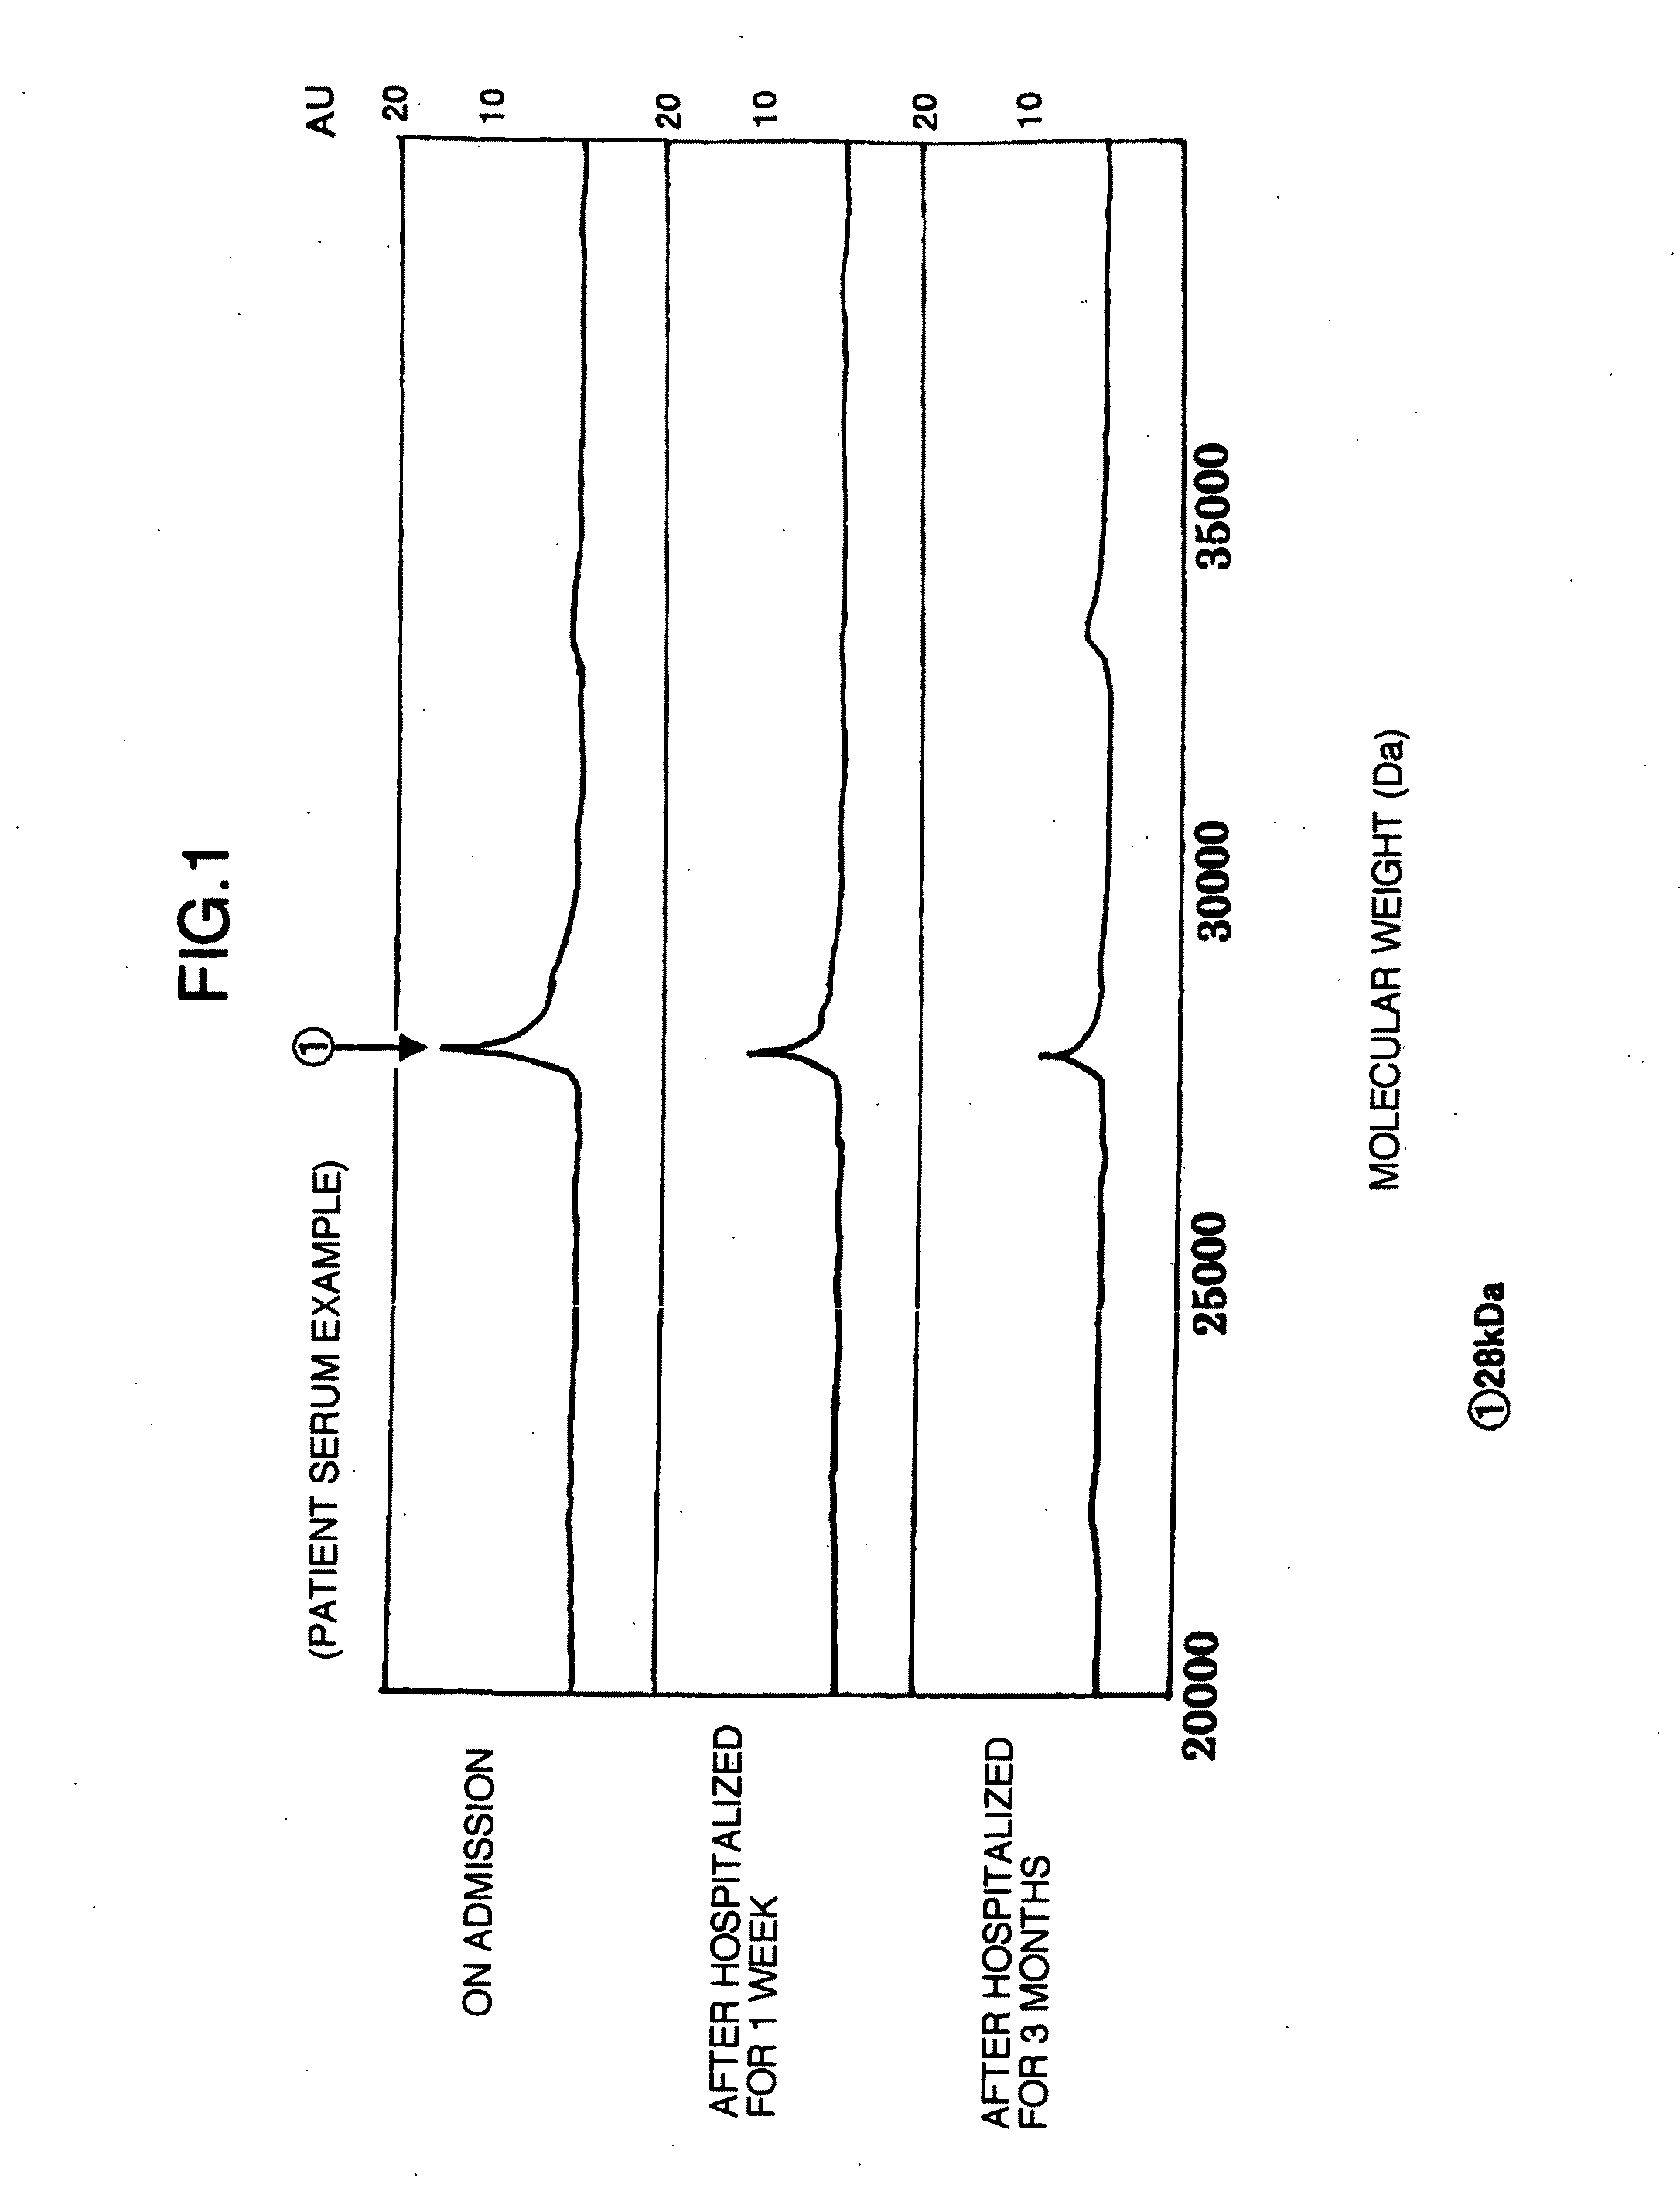 Marker proteins for diagnosing liver disease and method of diagnosing liver disease using the same